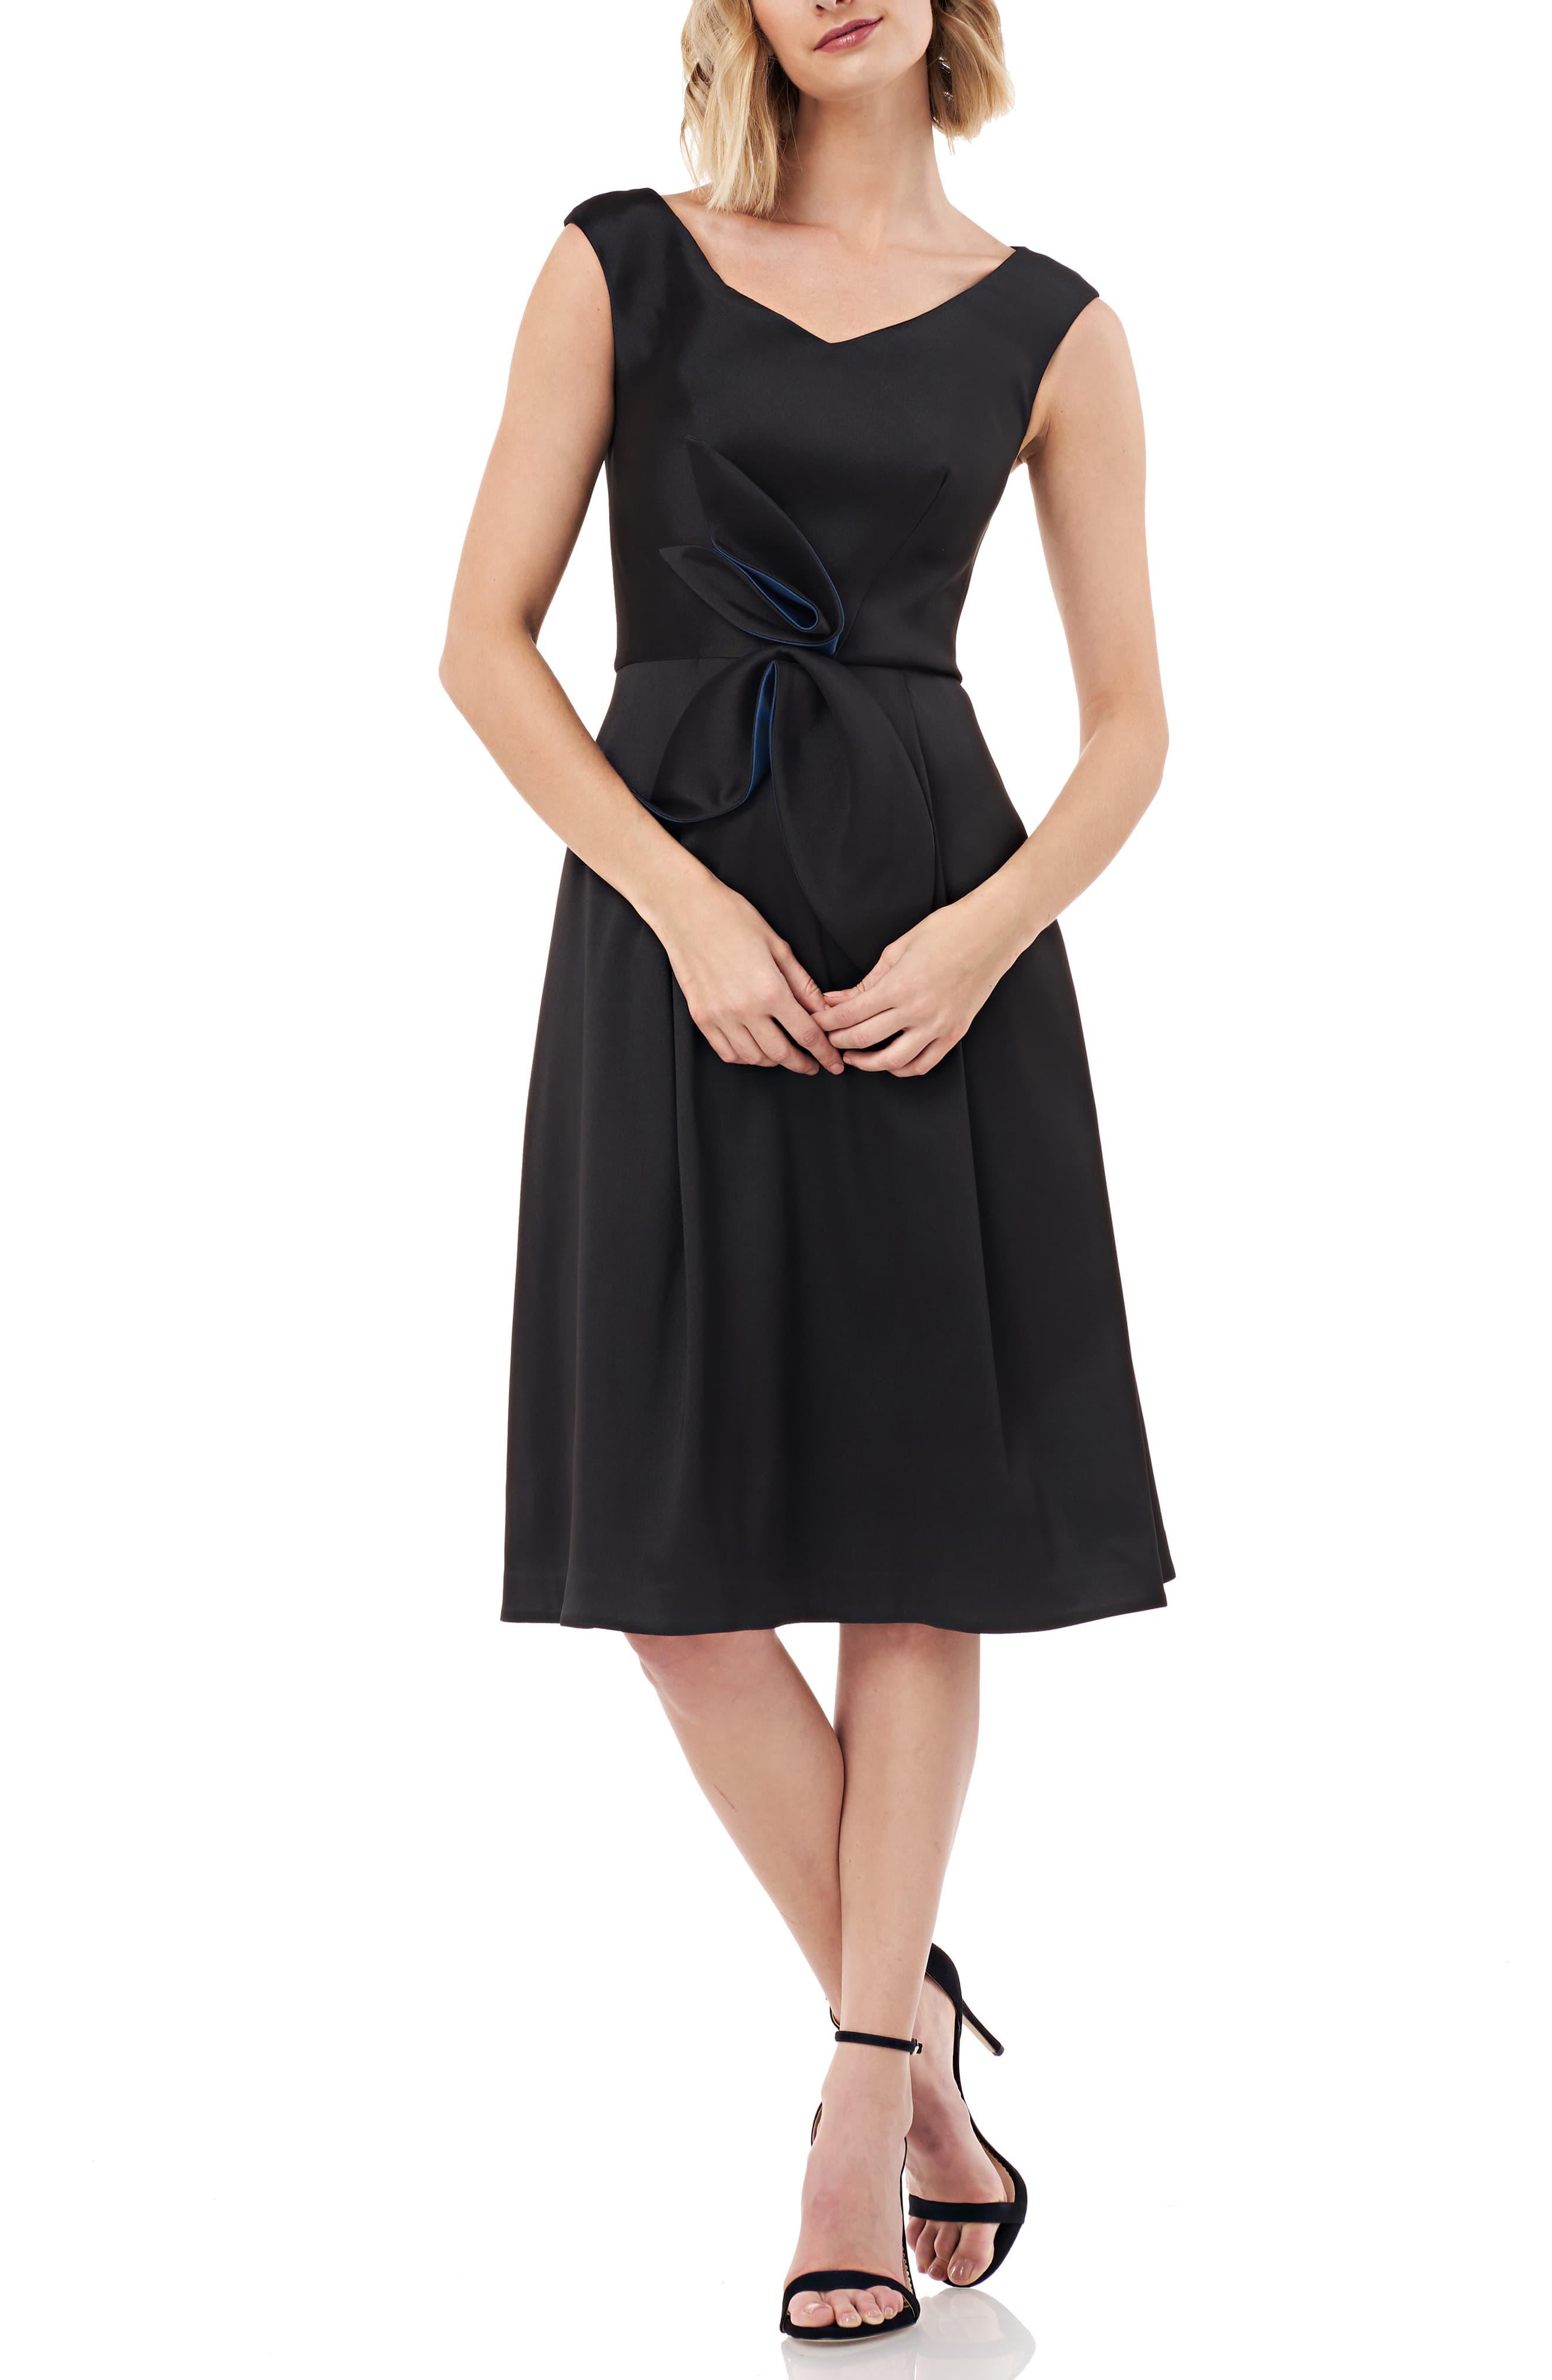 Kay Unger Sleeveless Stretch Mikado Fit & Flare Dress in Black - Lyst